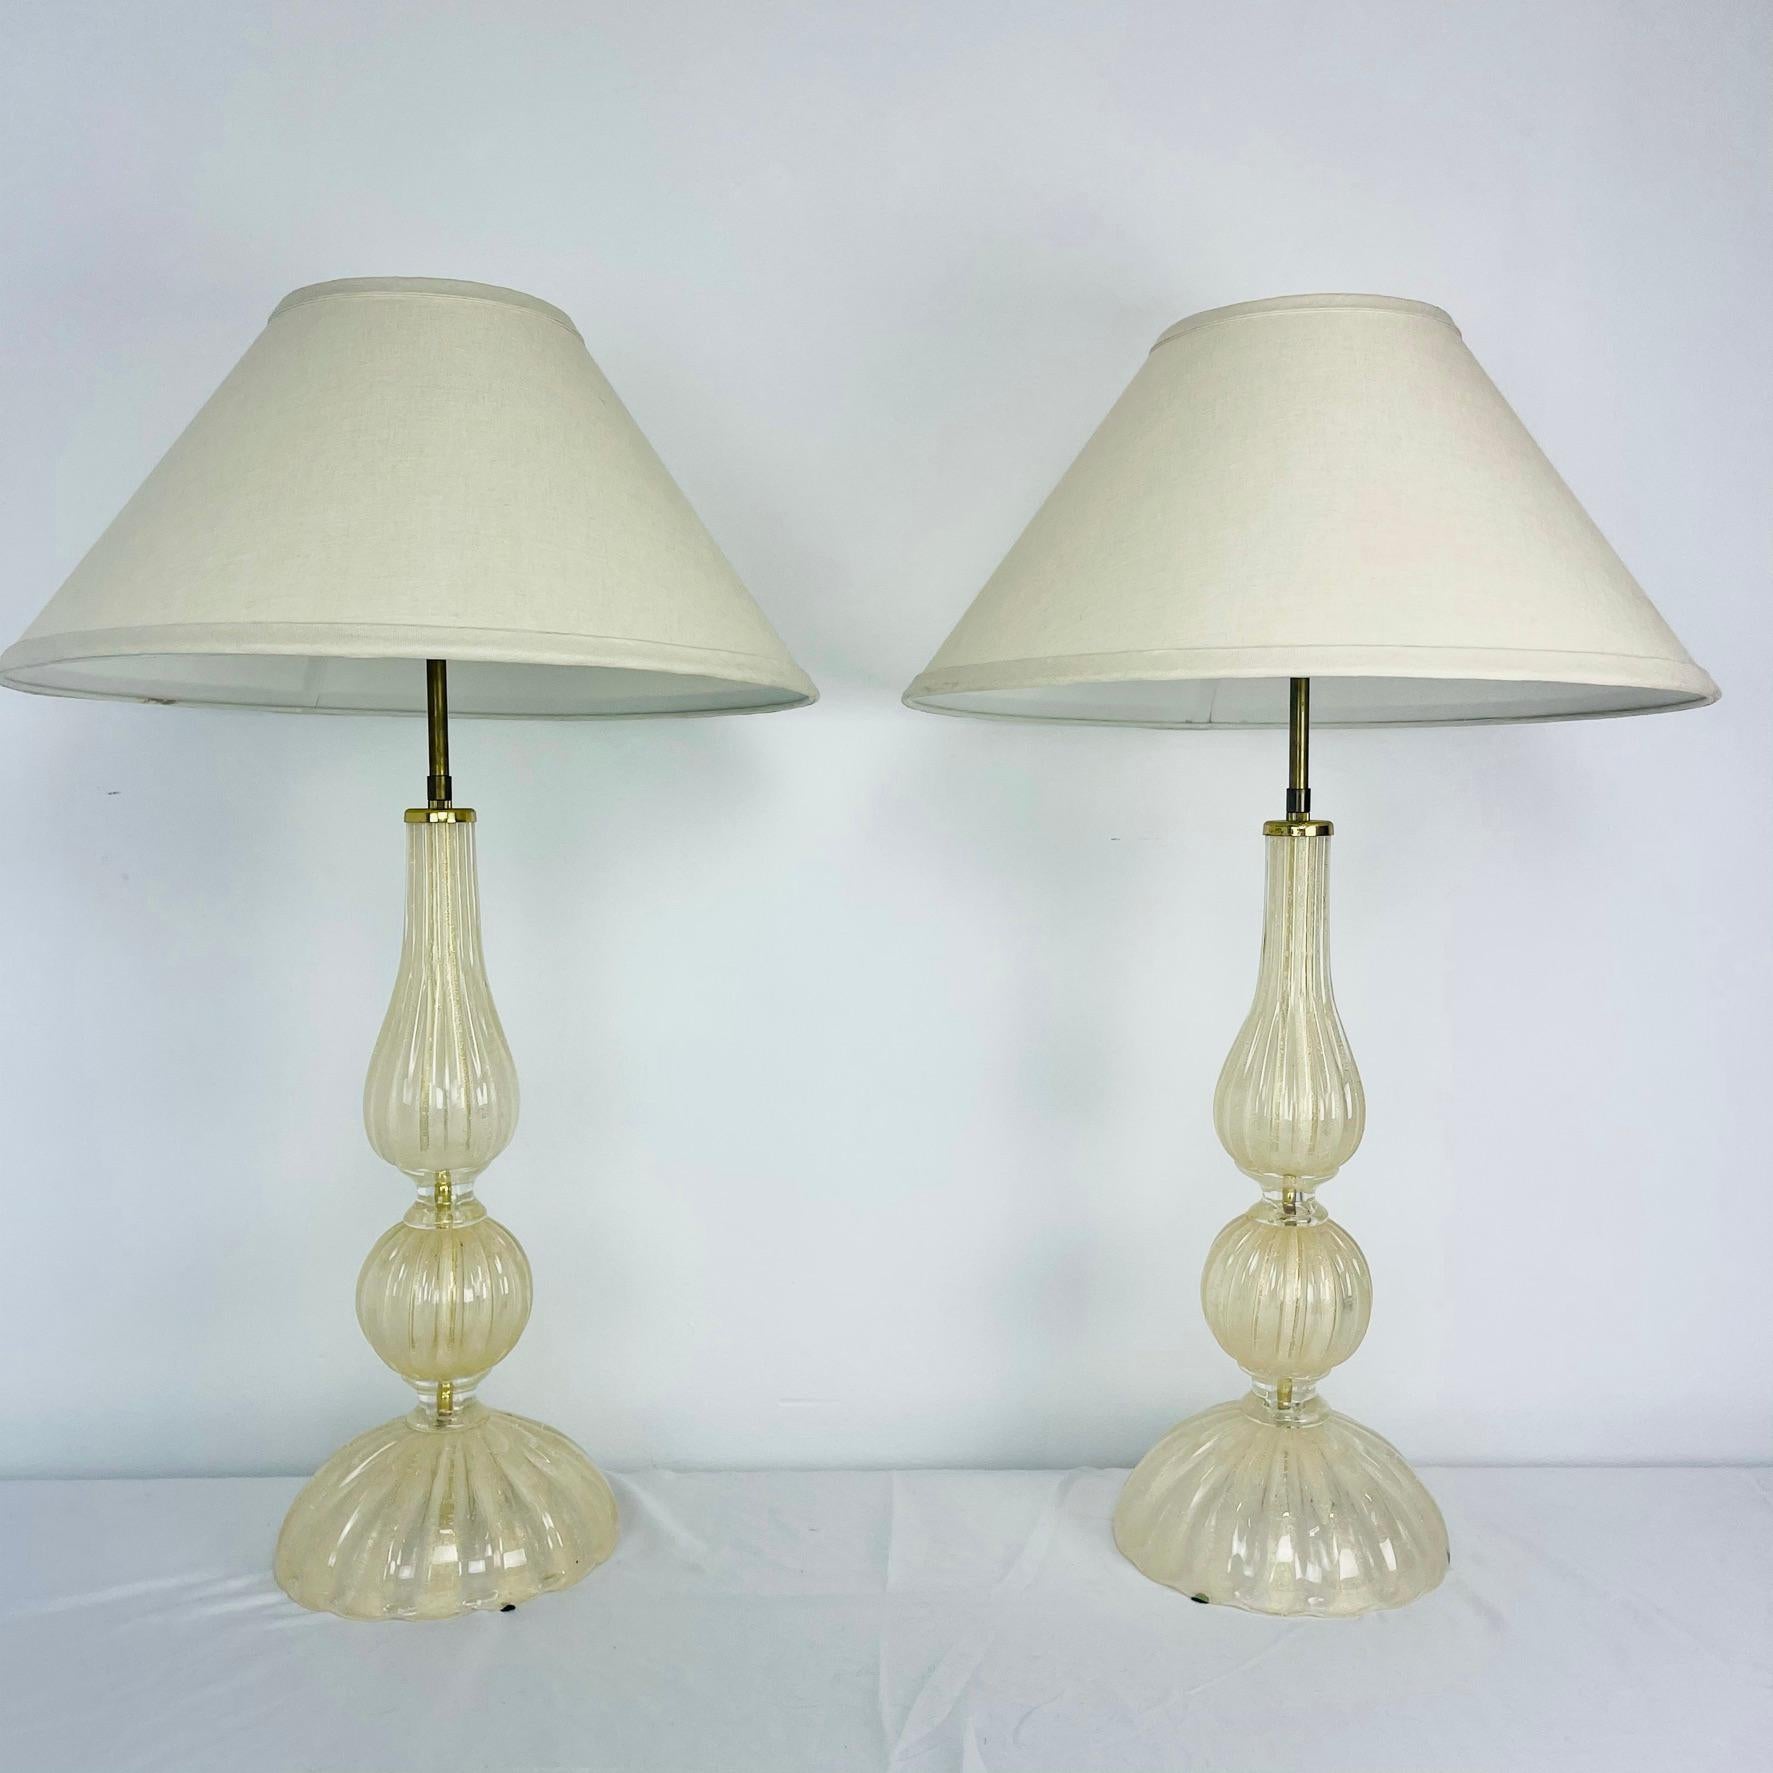 Gorgeous pair of gold fleck Murano glass table lamps by Seguso Vetri d'Arte. Shades not included.